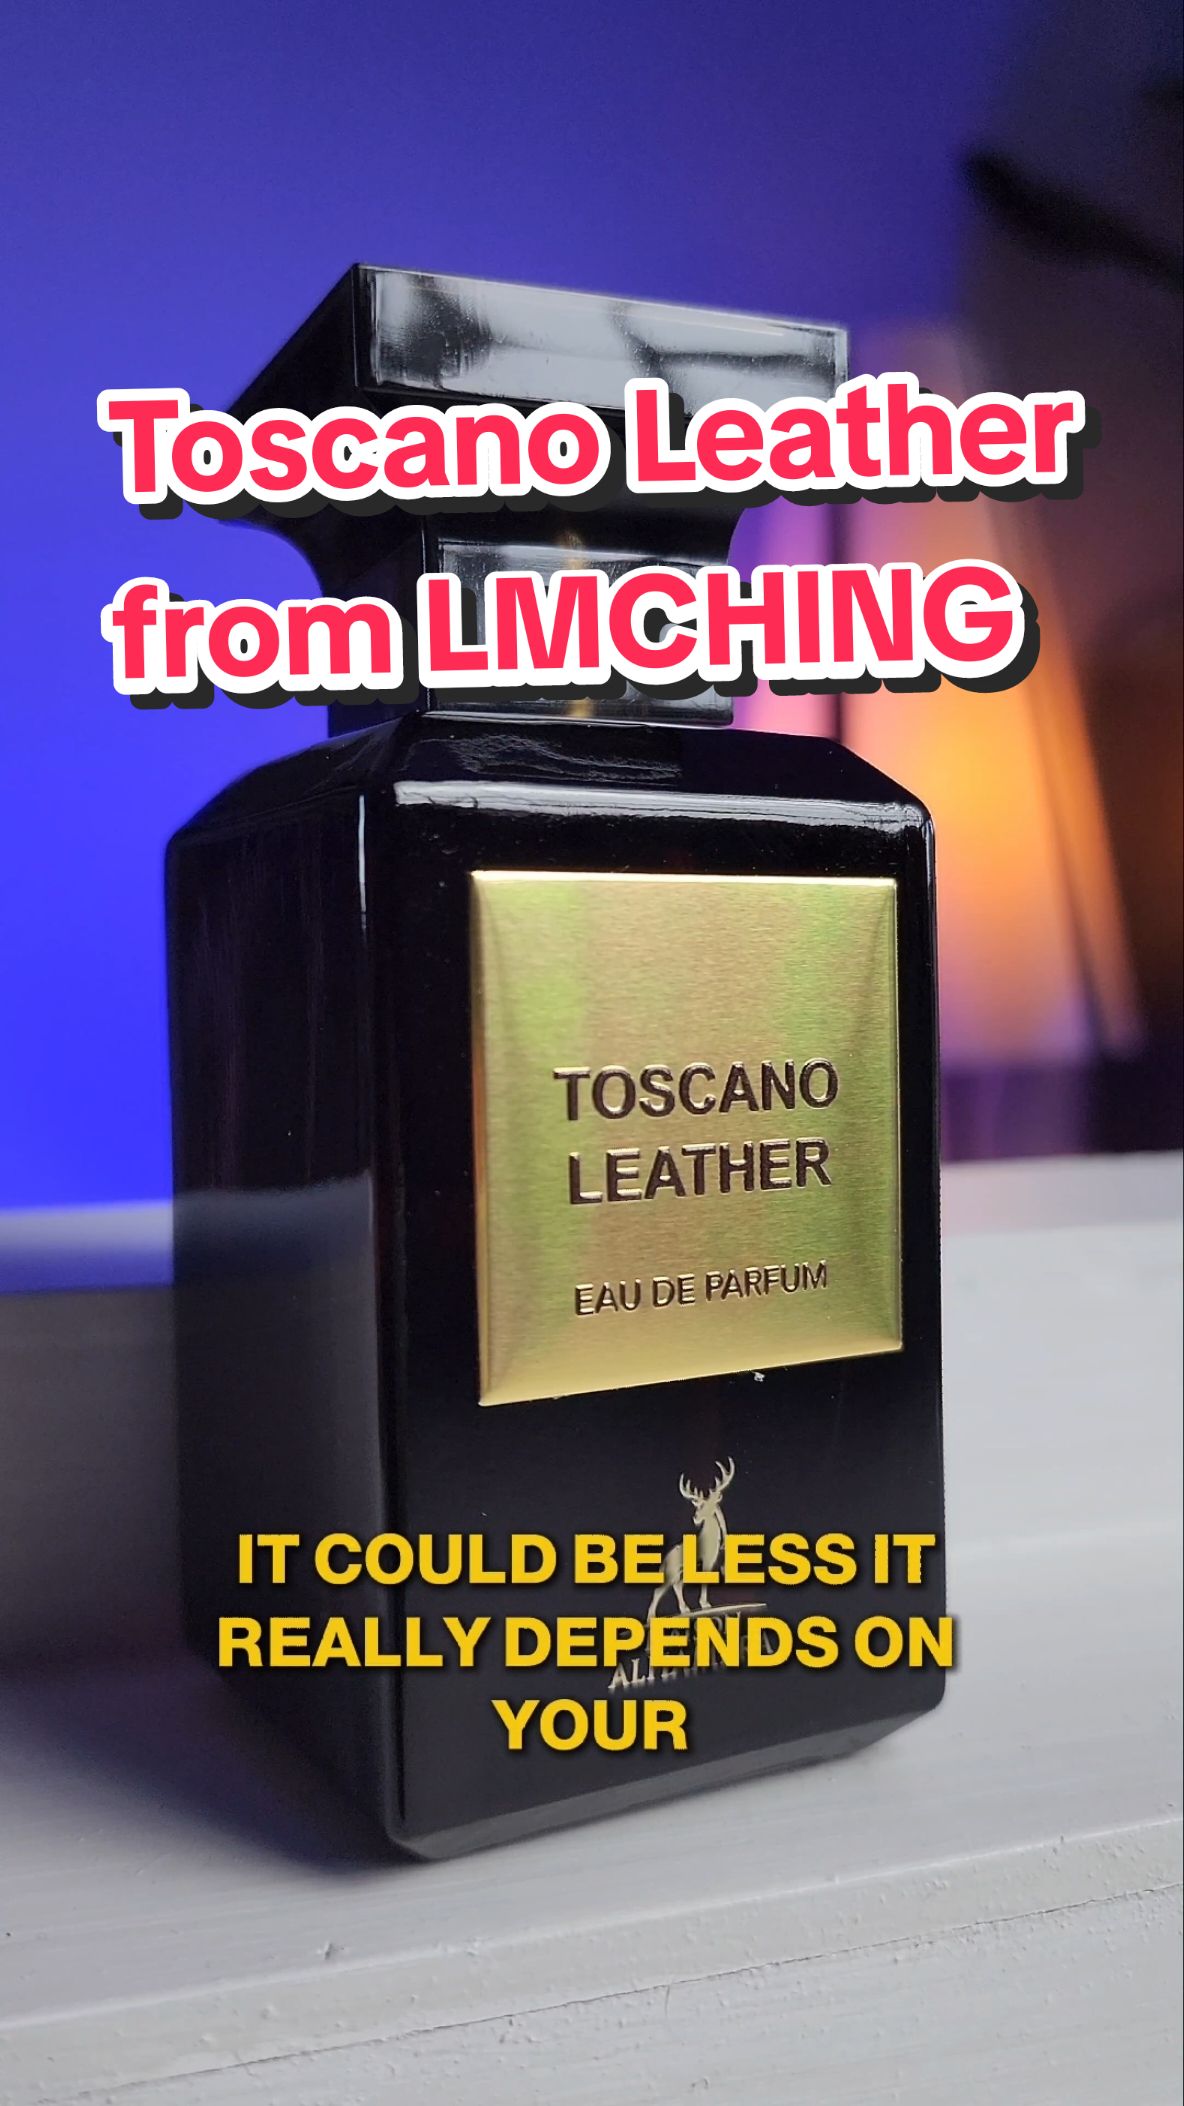 Maison Alhambra Toscano Leather from LMCHING @LMCHING.COM  I am Gillian, an experienced perfume reviewer known by the nickname Riveraedge. I am also a blogger, moderating information and providing advice for perfume blog articles of LMCHING.com #maisonalhambra #LMCHING #fragrance #perfume #lattafa